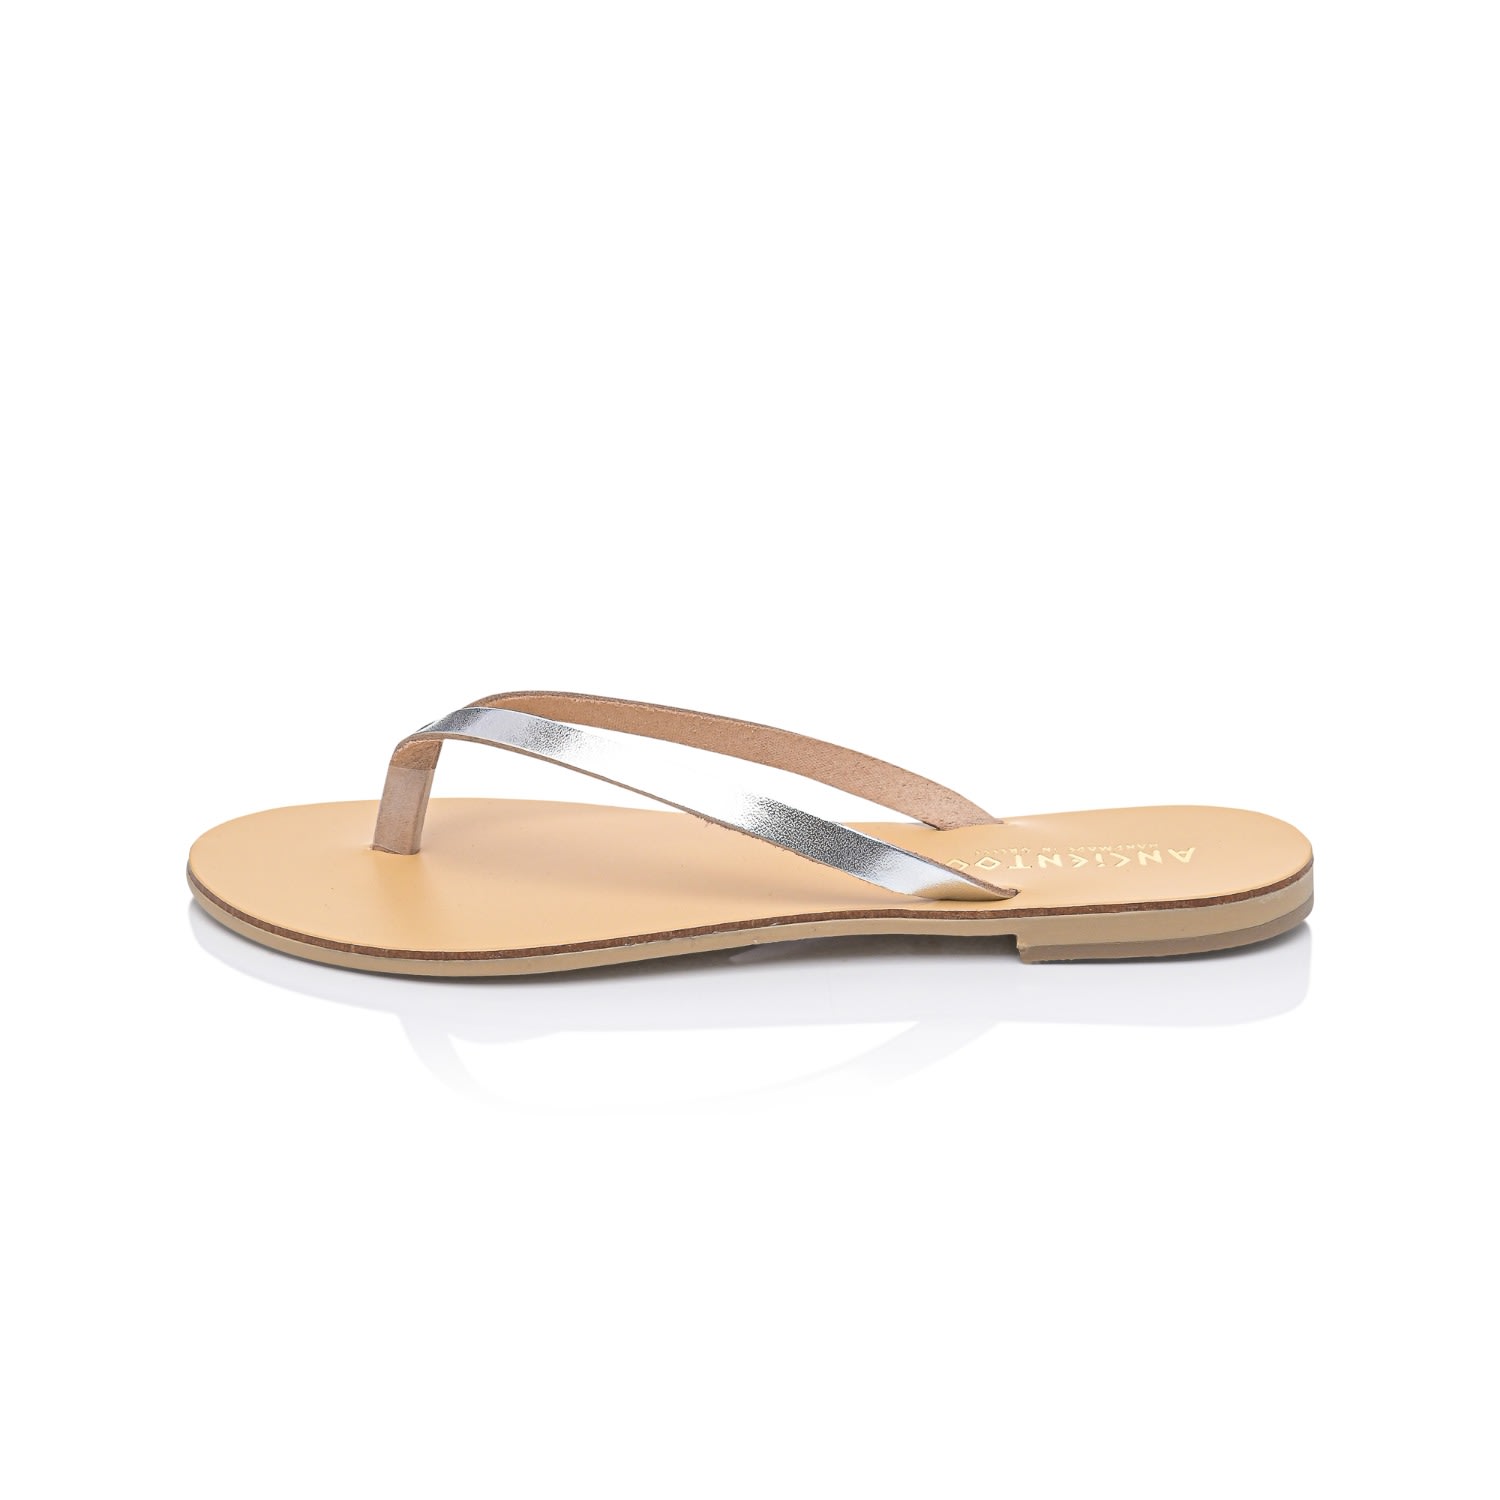 Ancientoo Neutrals / Silver Achelois Silver/nude Handcrafted Leather Flip Flop Sandal For Women